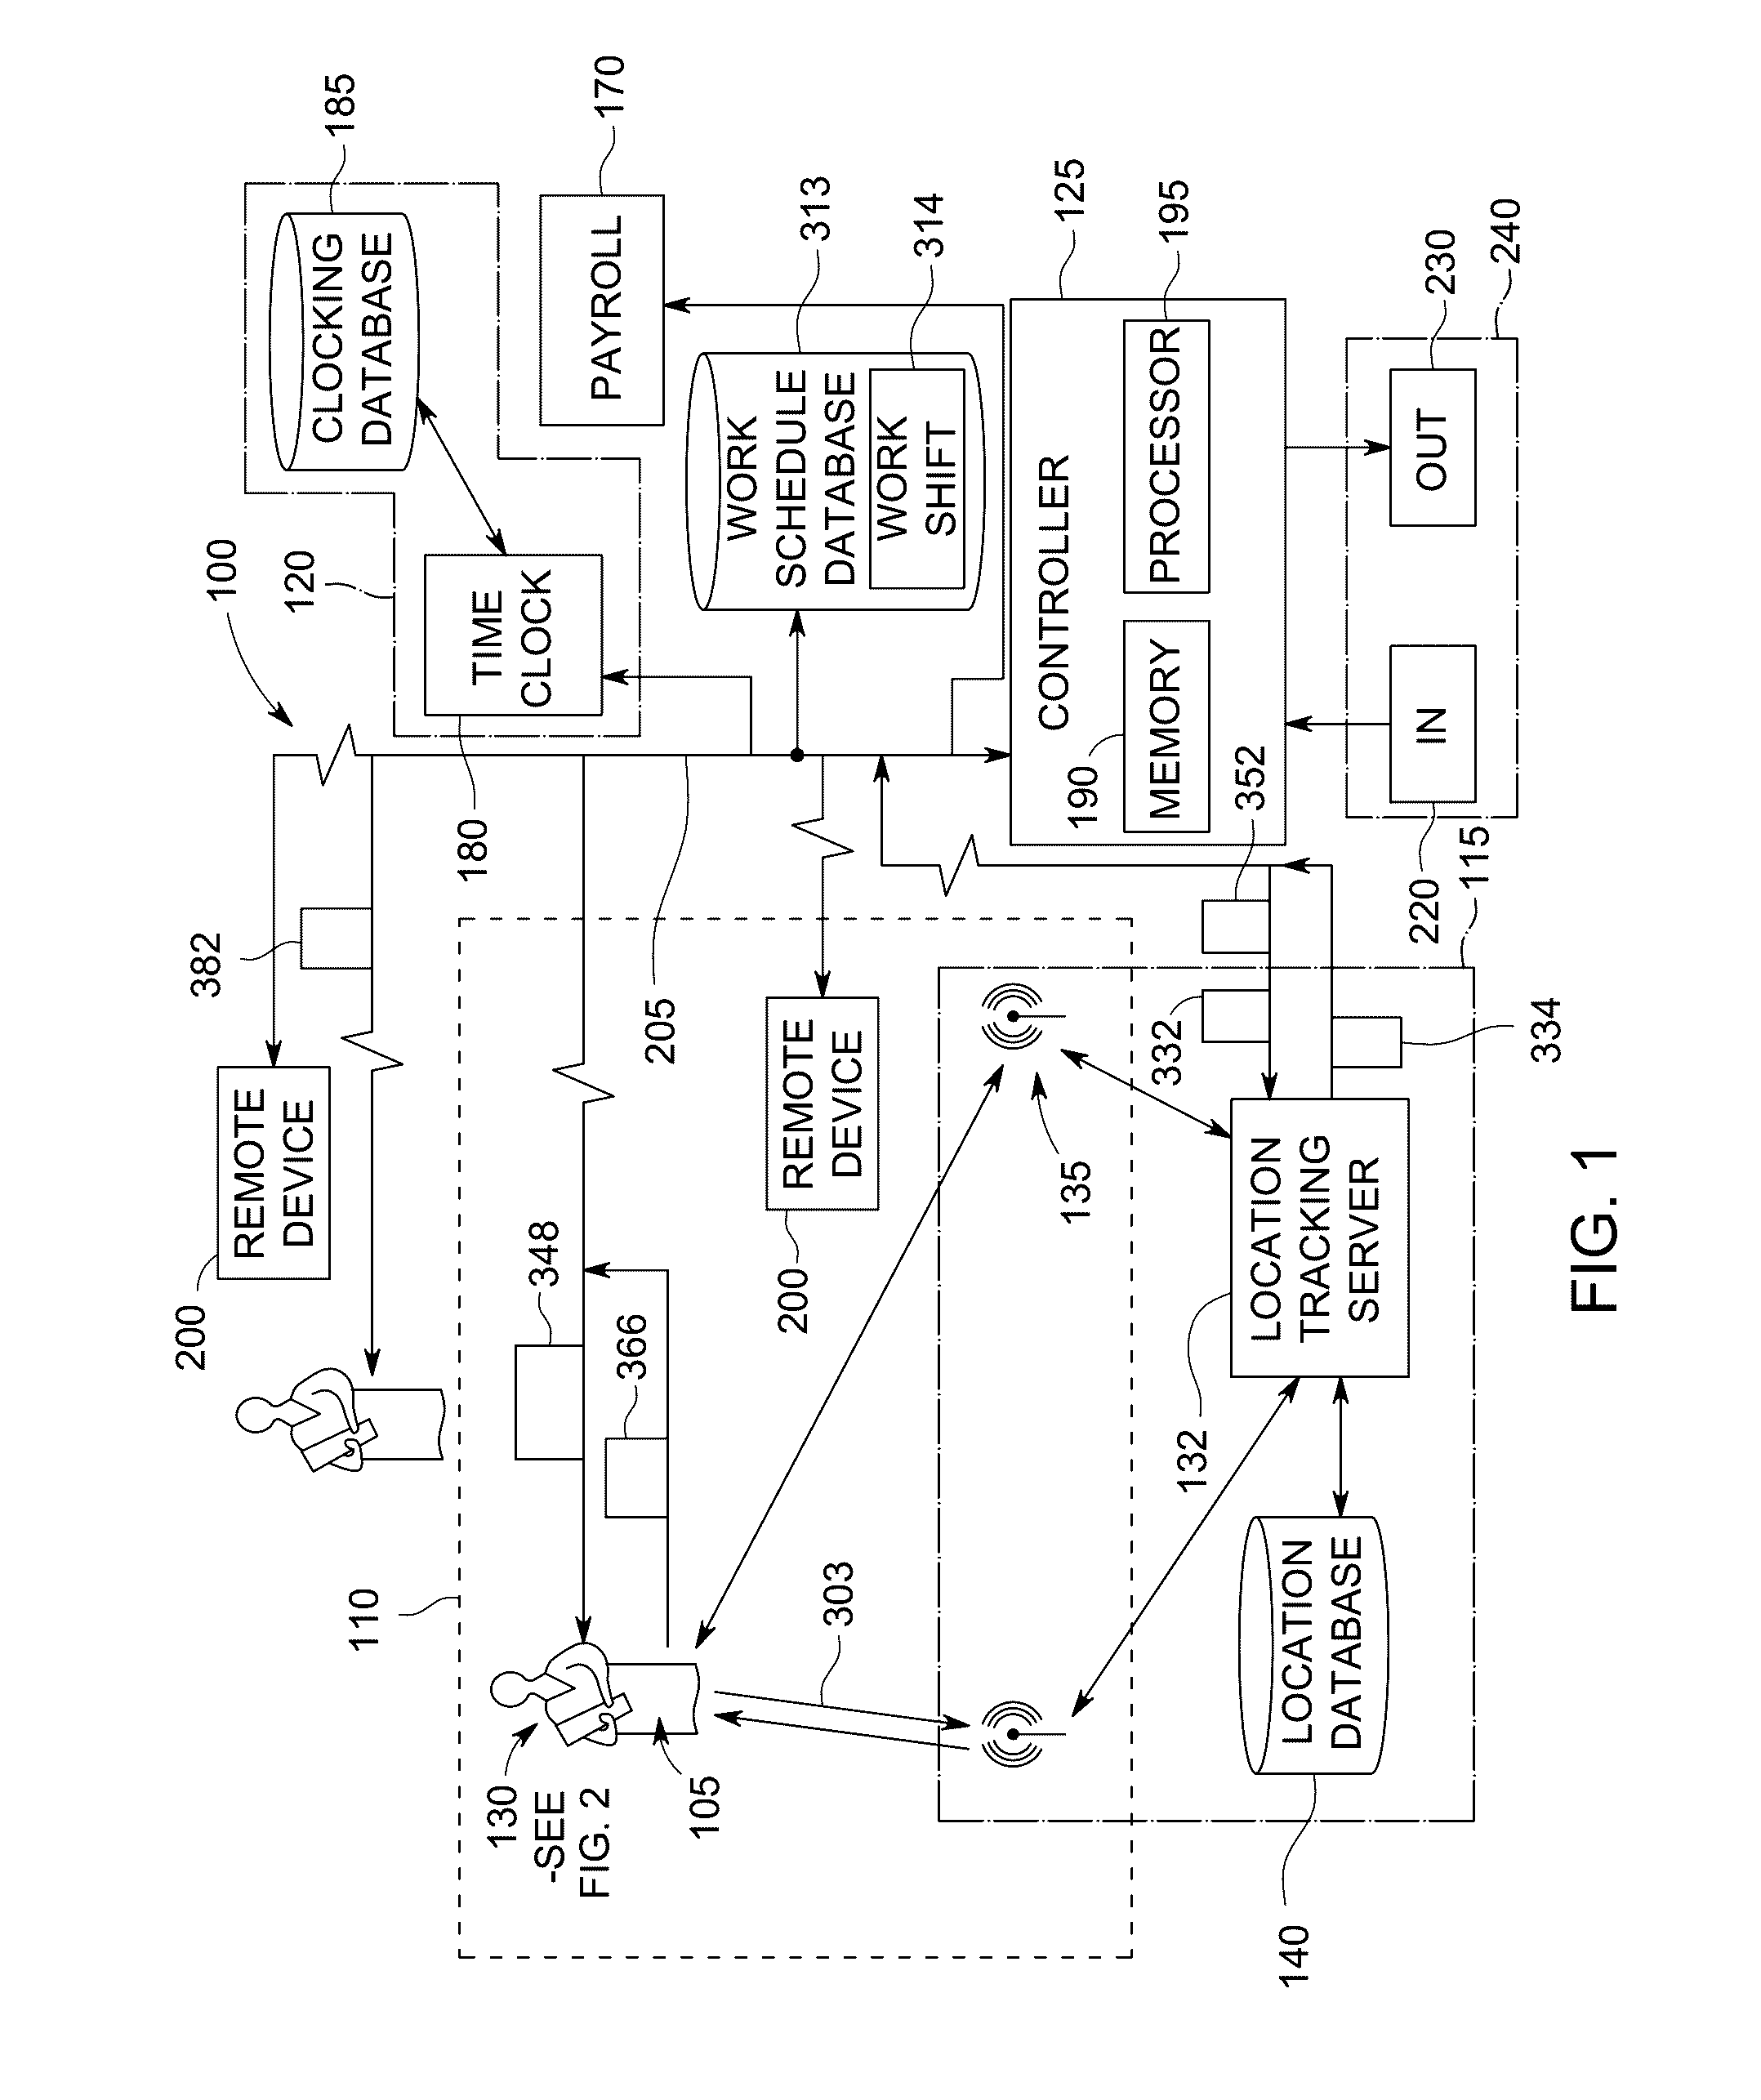 System and method to track time and attendance of an individual at a workplace for a scheduled workshift